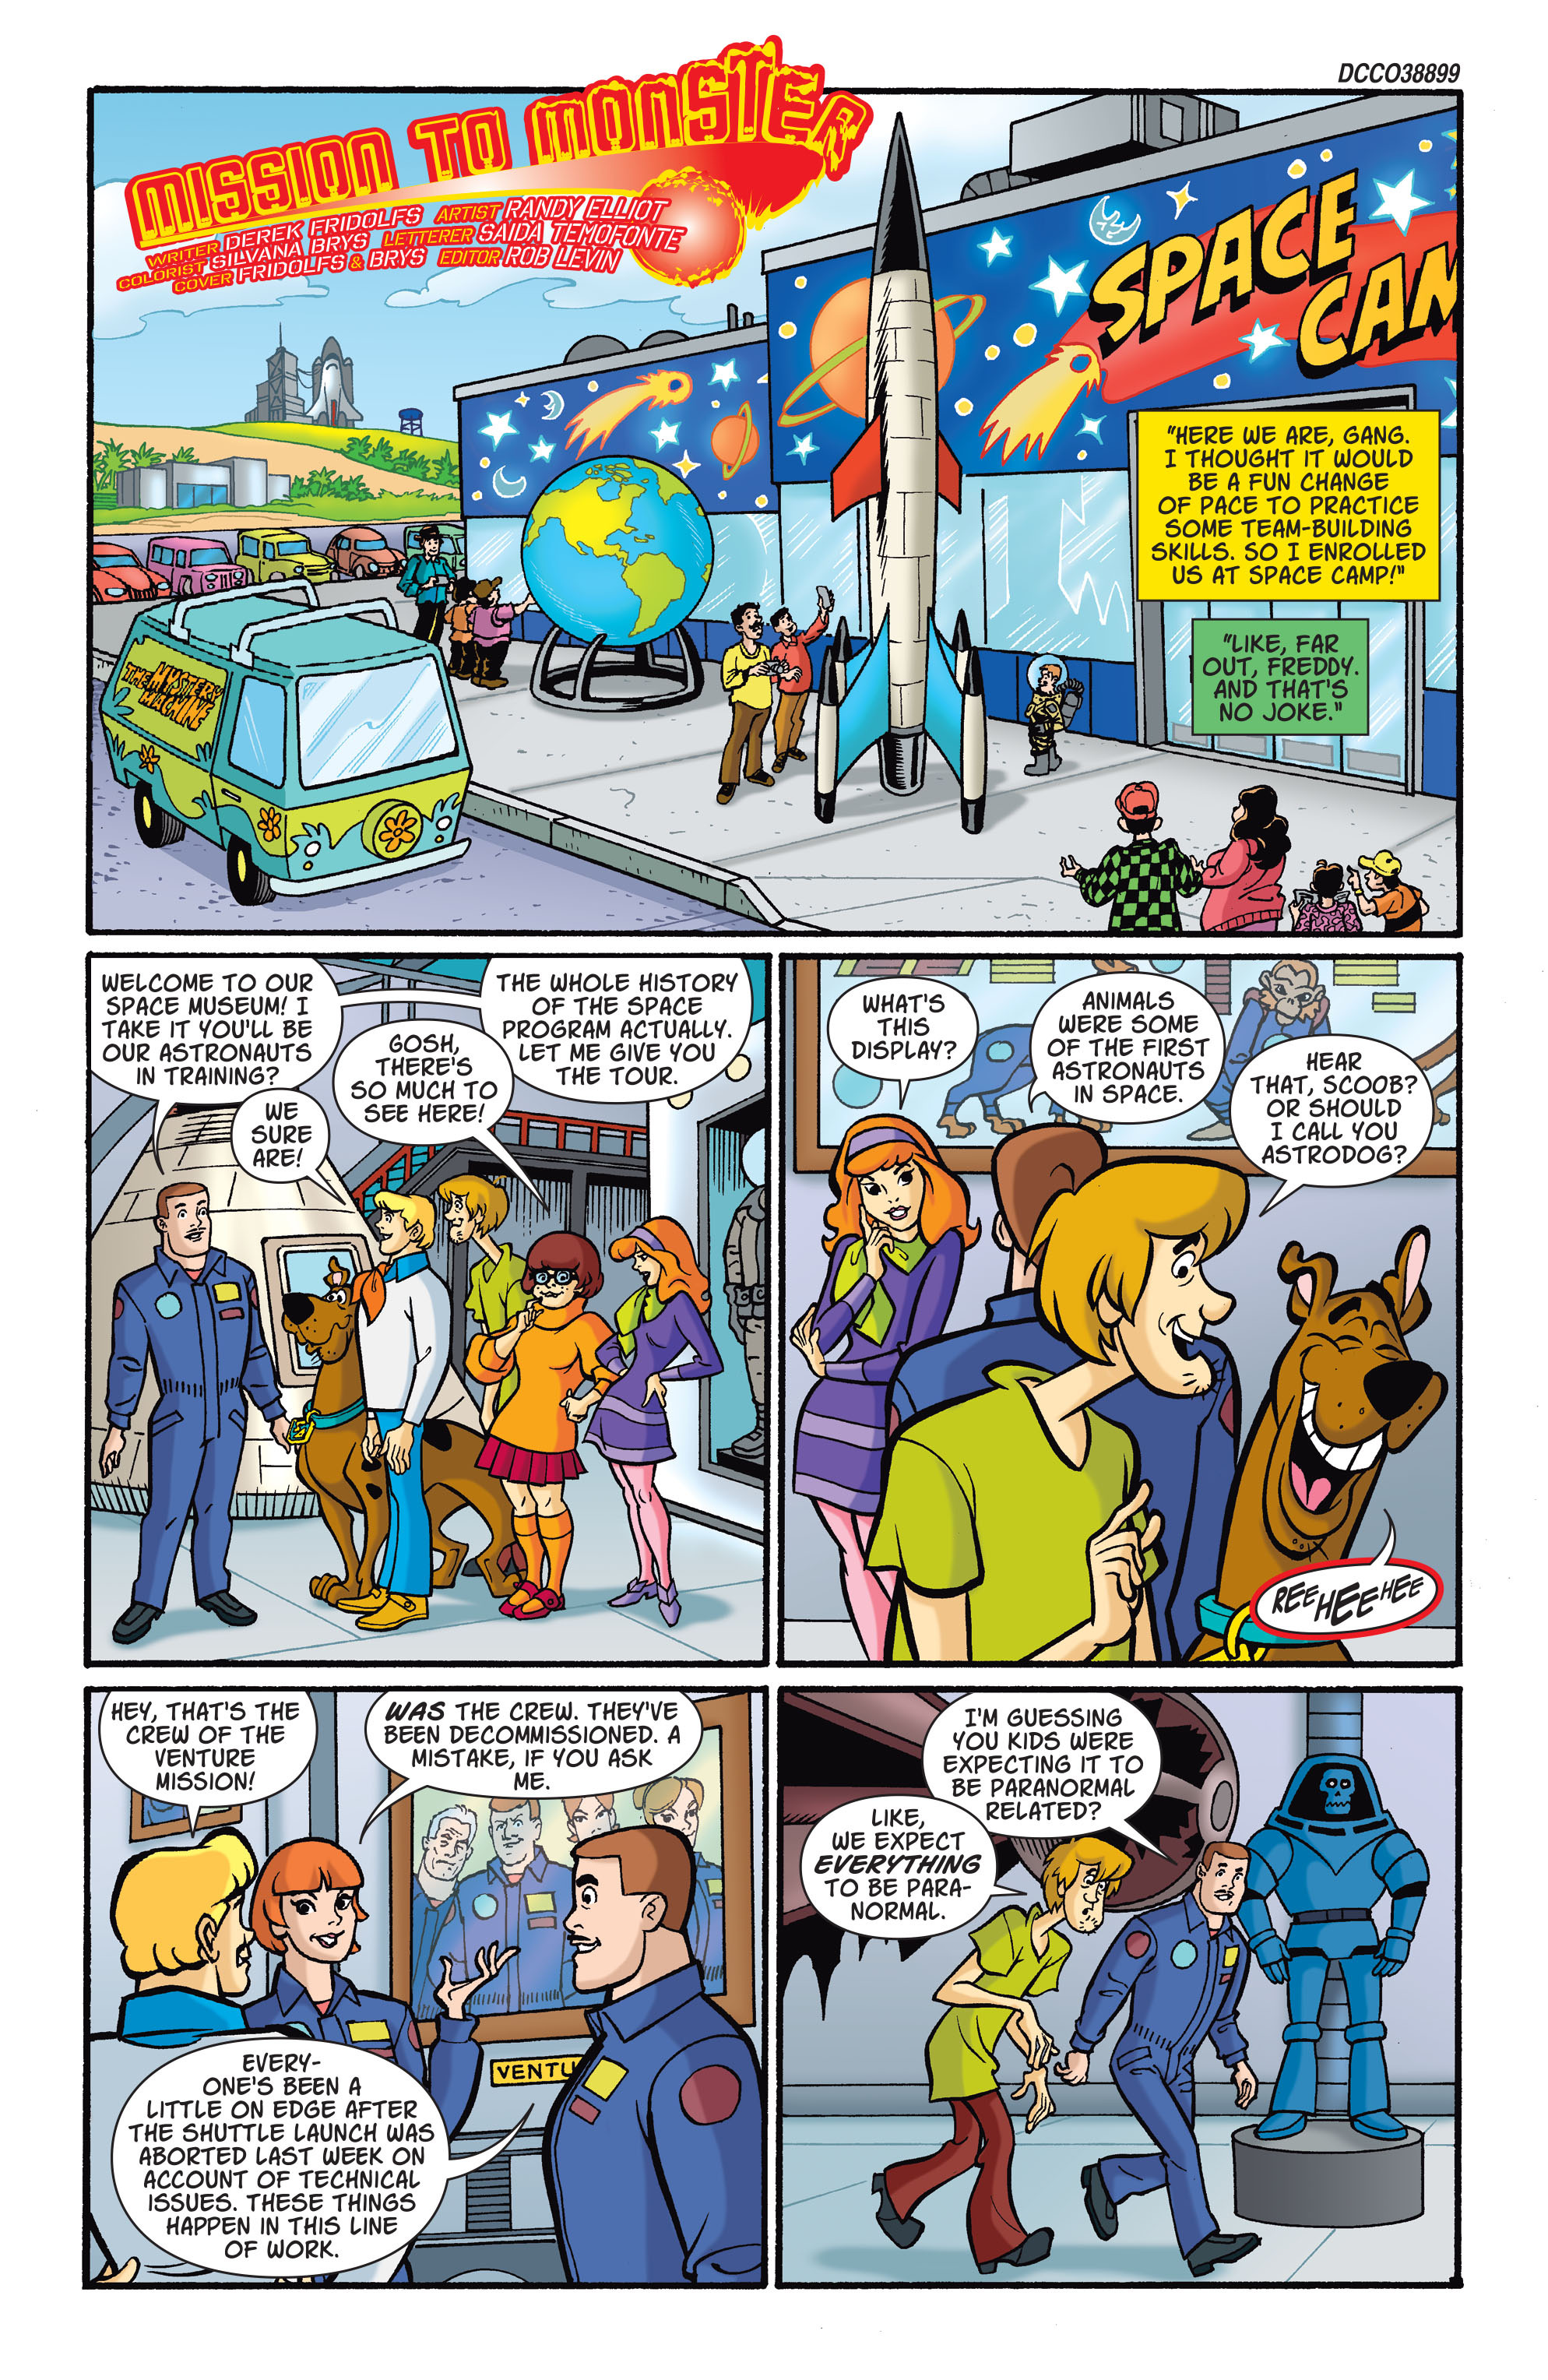 Scooby-Doo, Where Are You? (2010-): Chapter 78 - Page 2